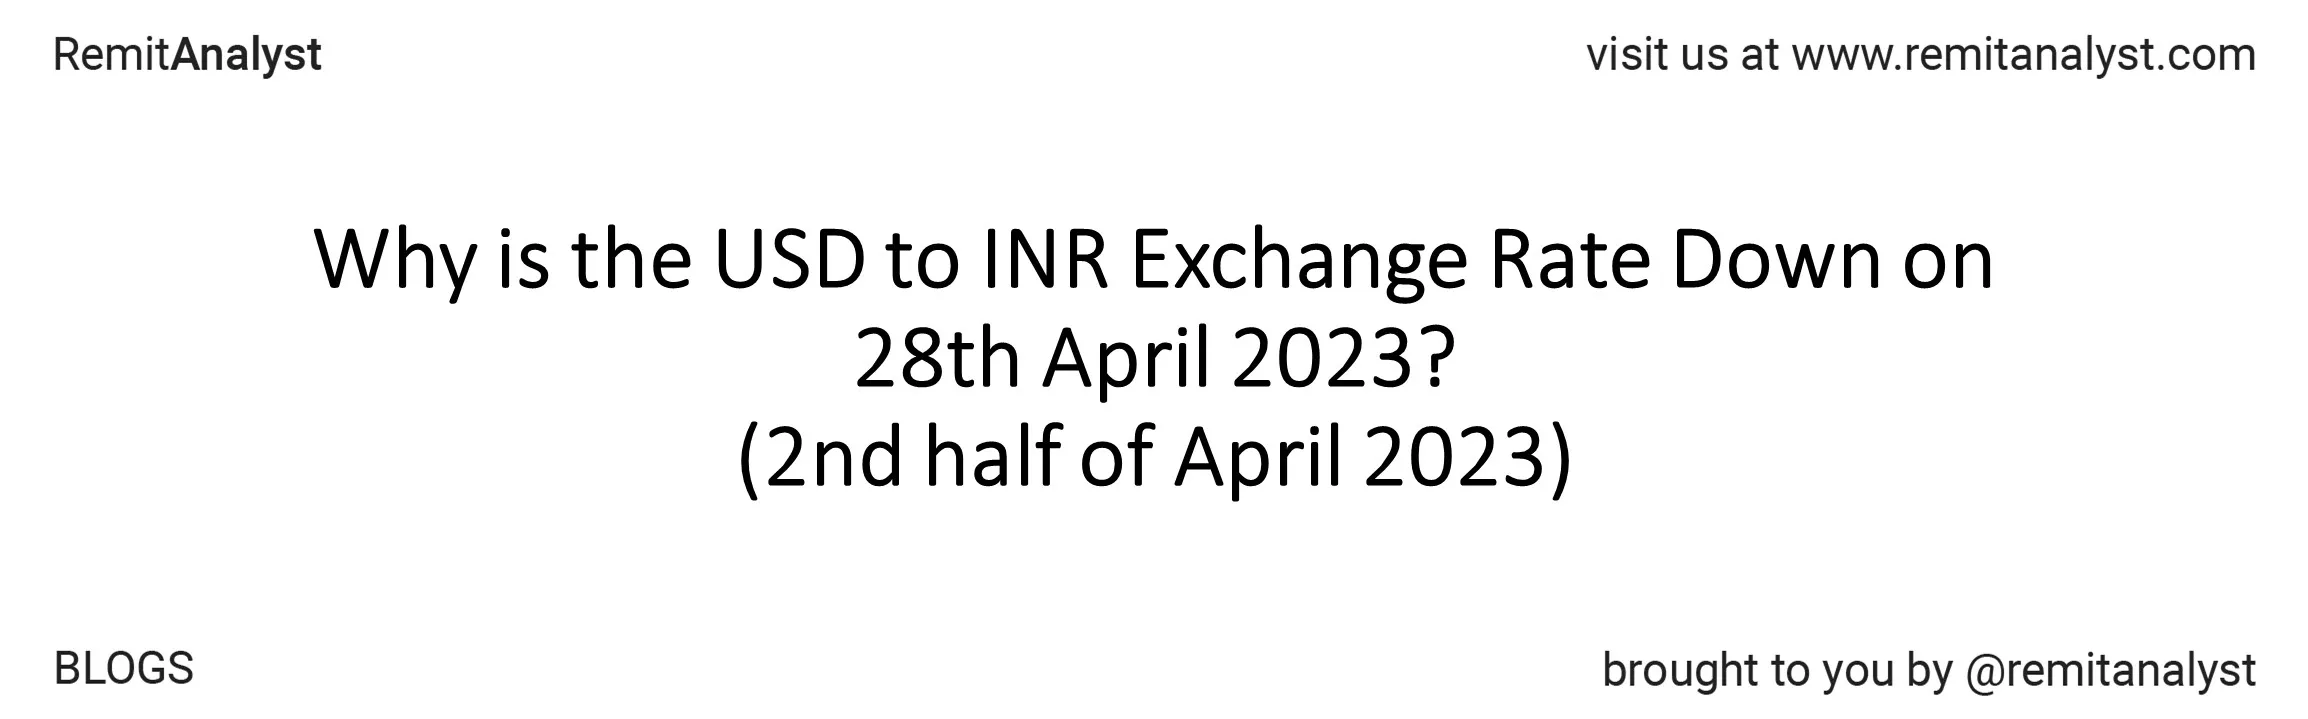 usd-to-inr-exchange-rate-17-apr-2023-to-28-apr-2023-title